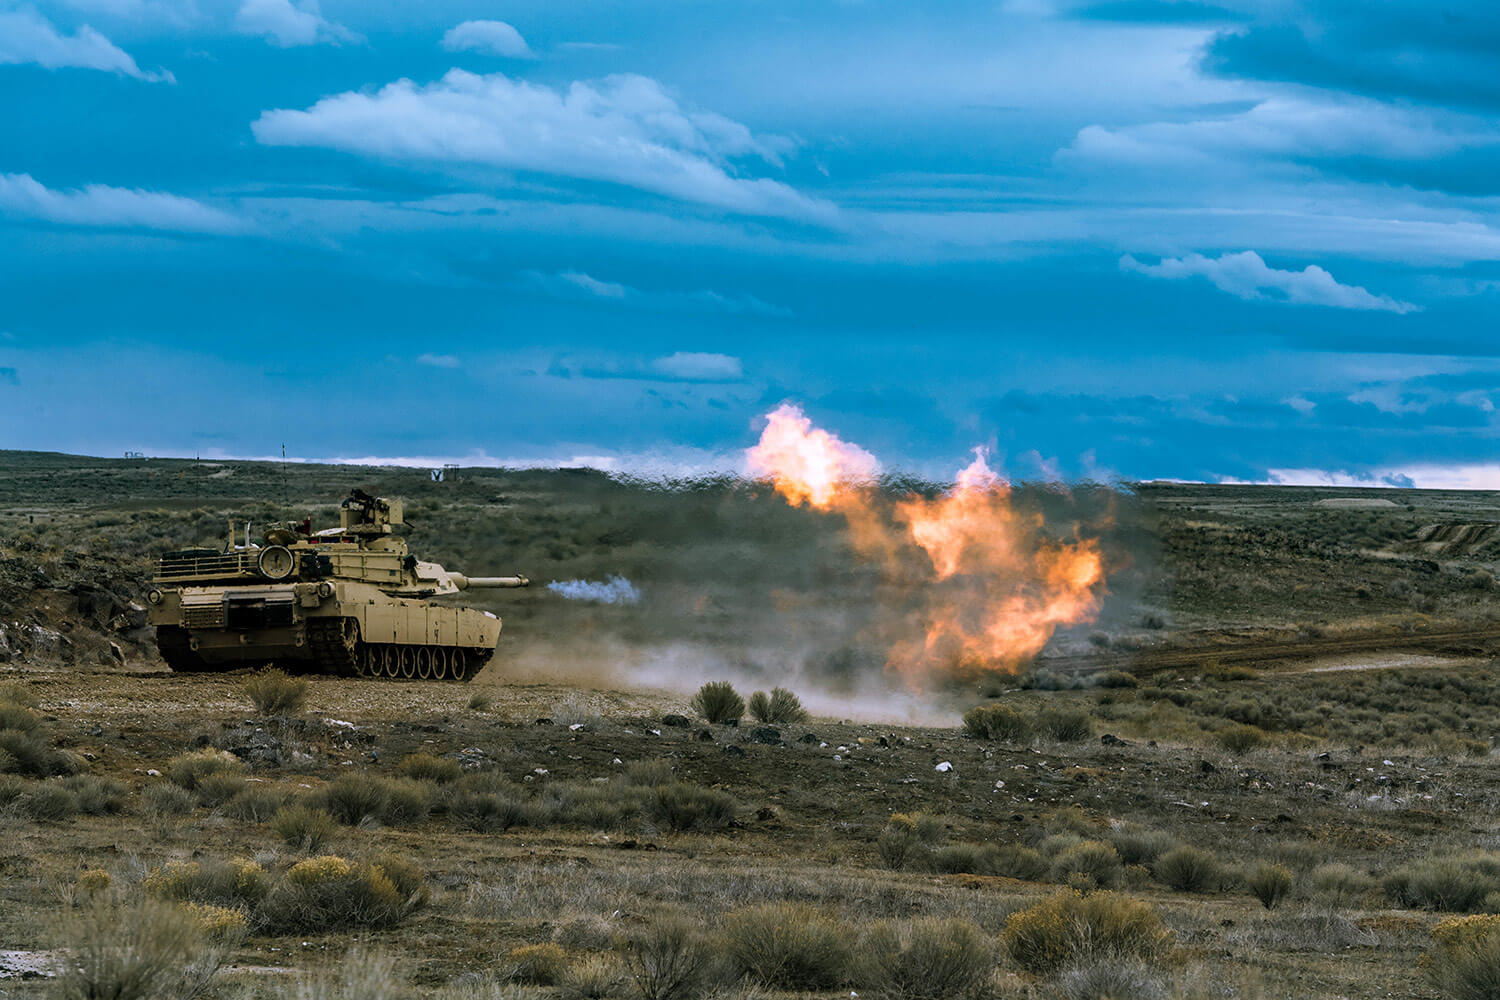 Members of Alpha Company, 2nd Battalion, 116th Cavalry Regiment, conduct table six tank crew qualification, February 2019, at the Orchard Combat Training Center in Boise, Idaho. The Idaho Army National Guard Soldiers are preparing for the 116th Cavalry Brigade Combat Team’s upcoming rotation at the National Training Center, Fort Irwin, Calif., later this year. Idaho Army National Guard photo by SGT Mason Cutrer